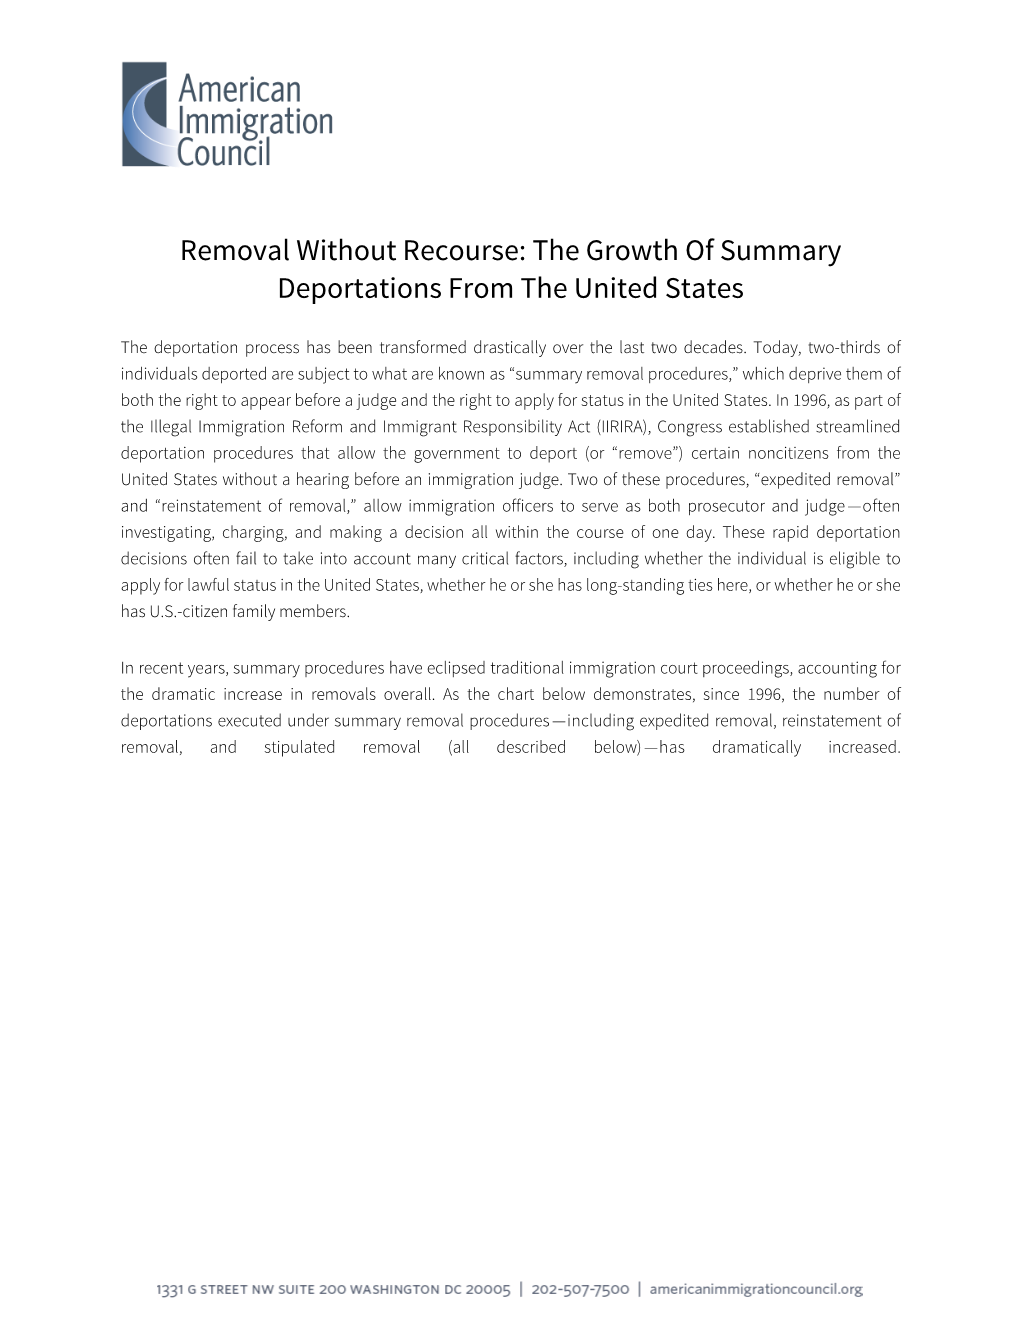 Removal Without Recourse: the Growth of Summary Deportations from the United States